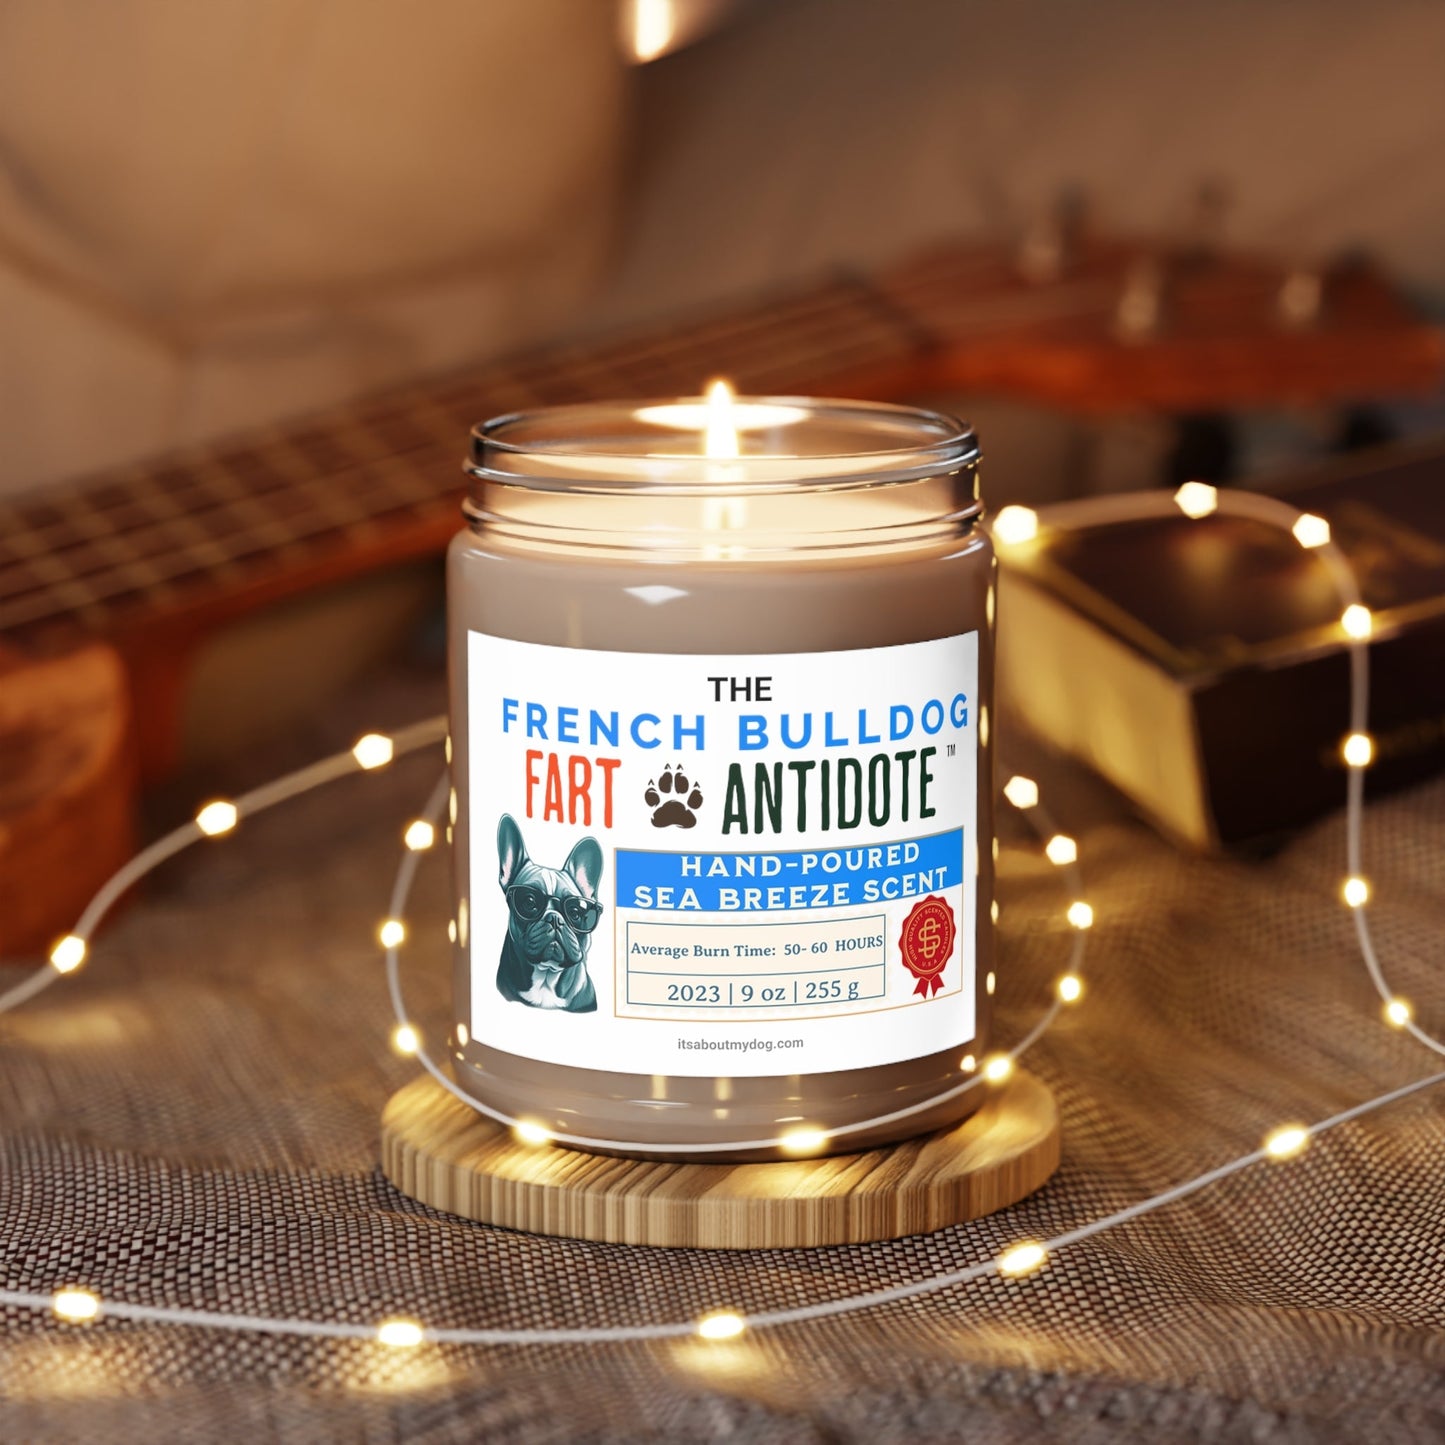 French Bulldog-Scented Candles, 9oz27.99-(FREE Delivery) Shop now at itsaboutmydog.com, Assembled in the USA, Assembled in USA, Bio, Decor, Eco-friendly, Home & Living, Home Decor, Made in the USA, Made in USA, Seasonal Picks